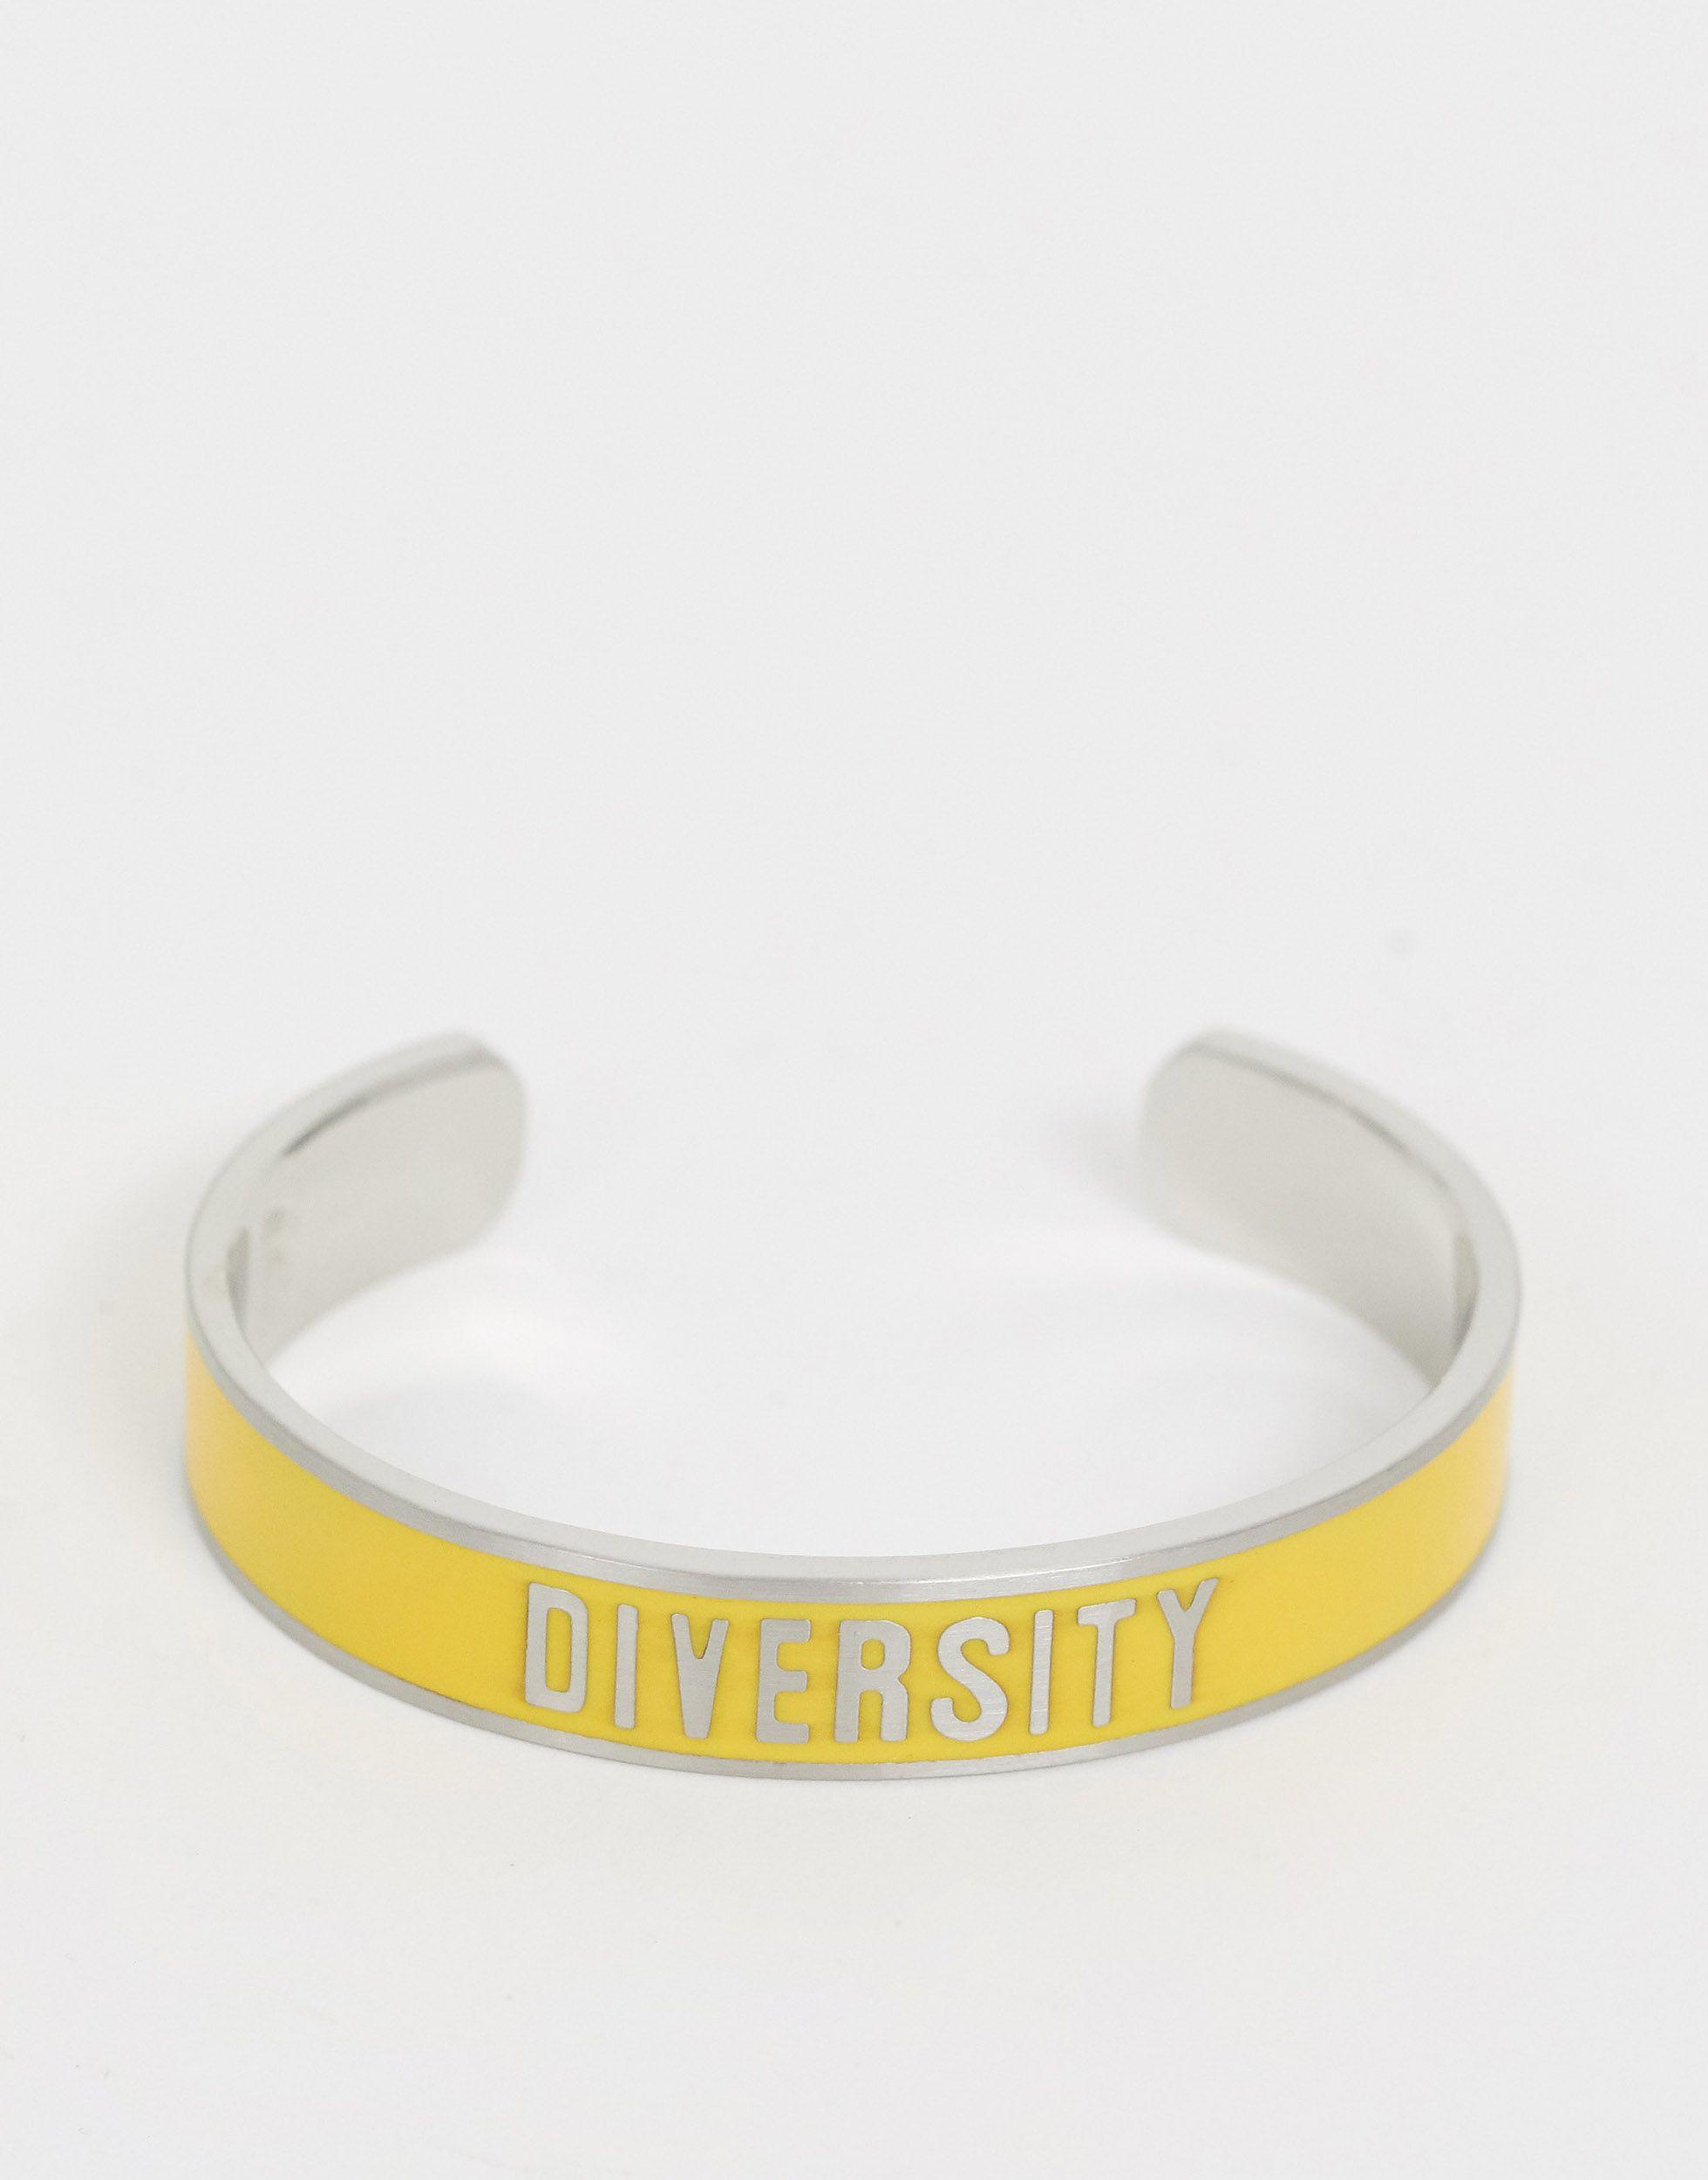 Benetton Diversity Collection Bracelet With Diversity Slogan in Yellow -  Lyst